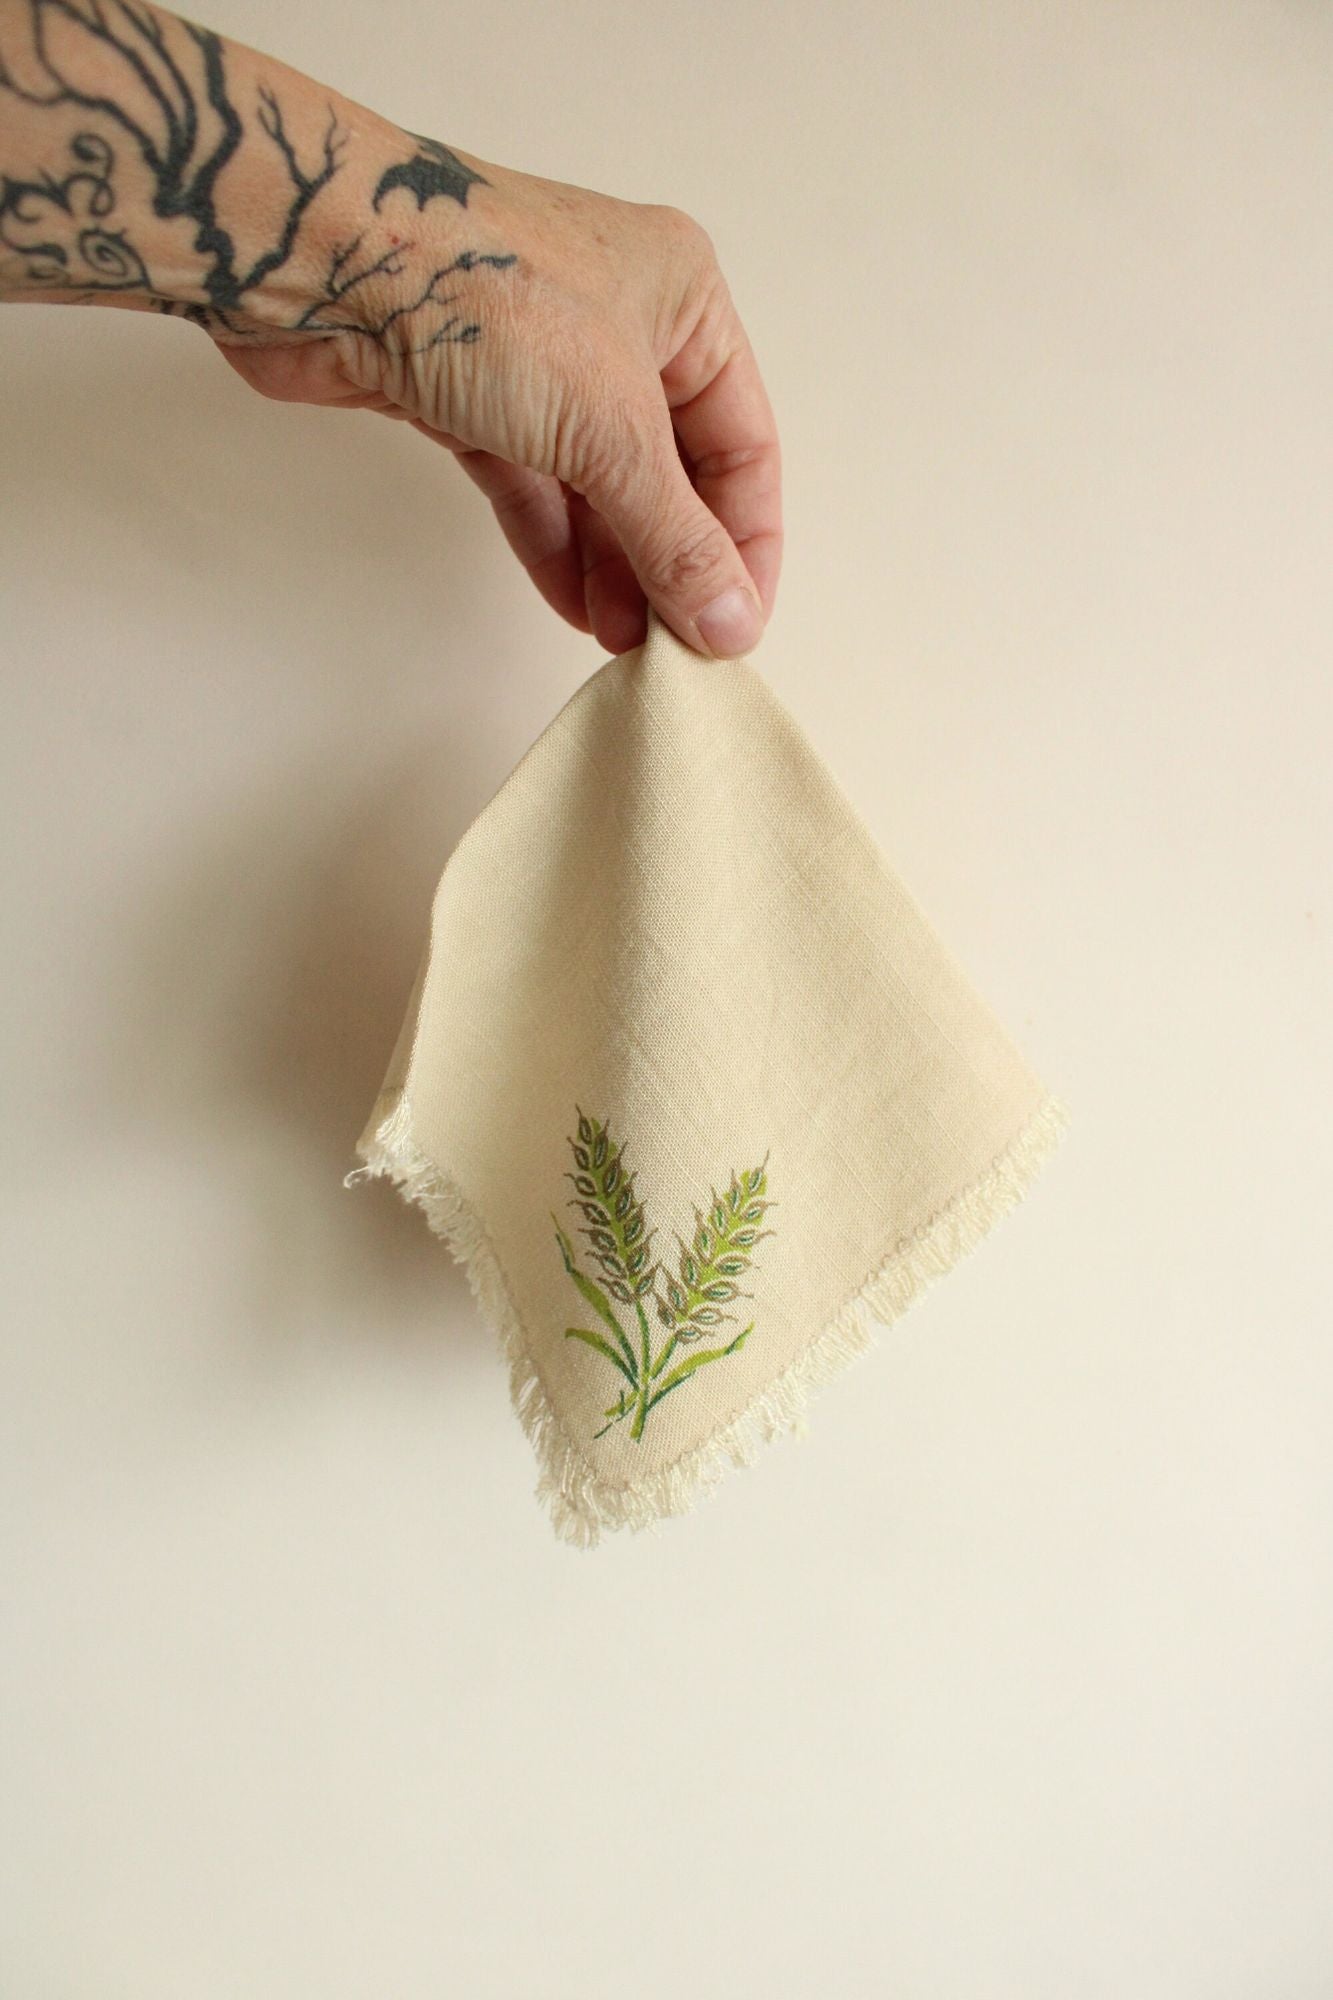 Vintage 1970s 1980s Set of Four Napkins with a Lavender or Wheat Print on Beige Linen